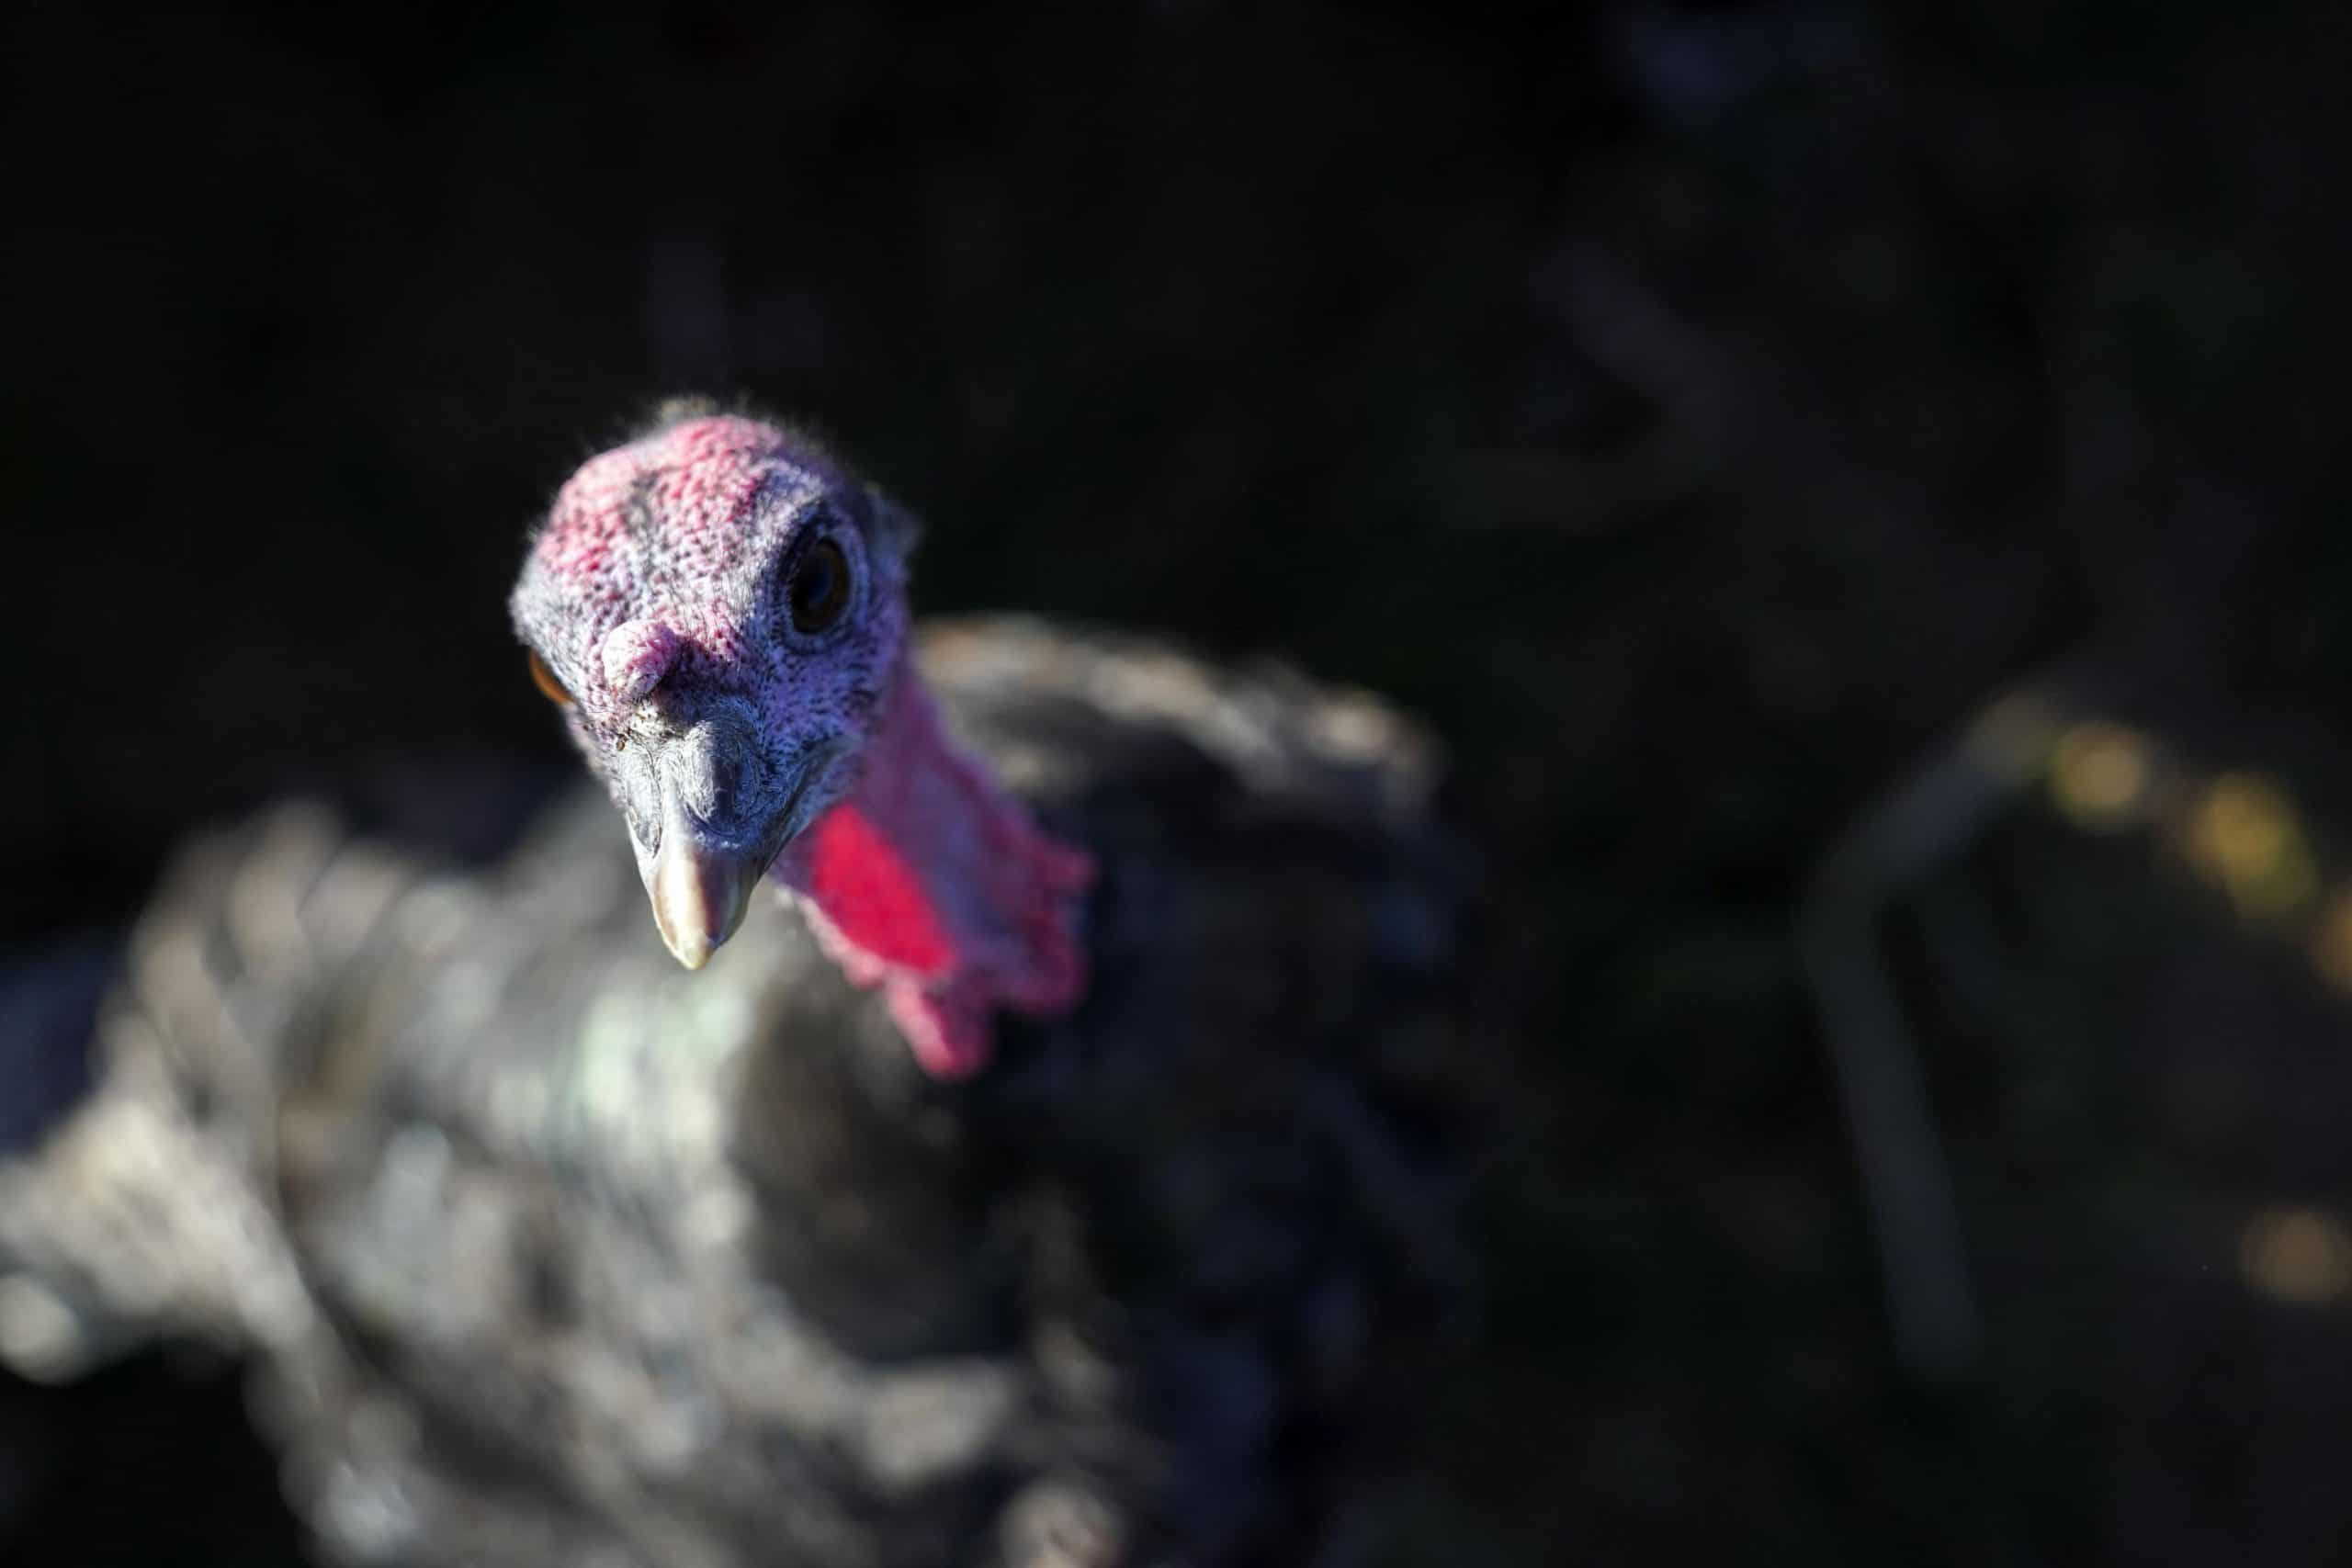 There’ll be no British turkeys this Christmas, MPs warned